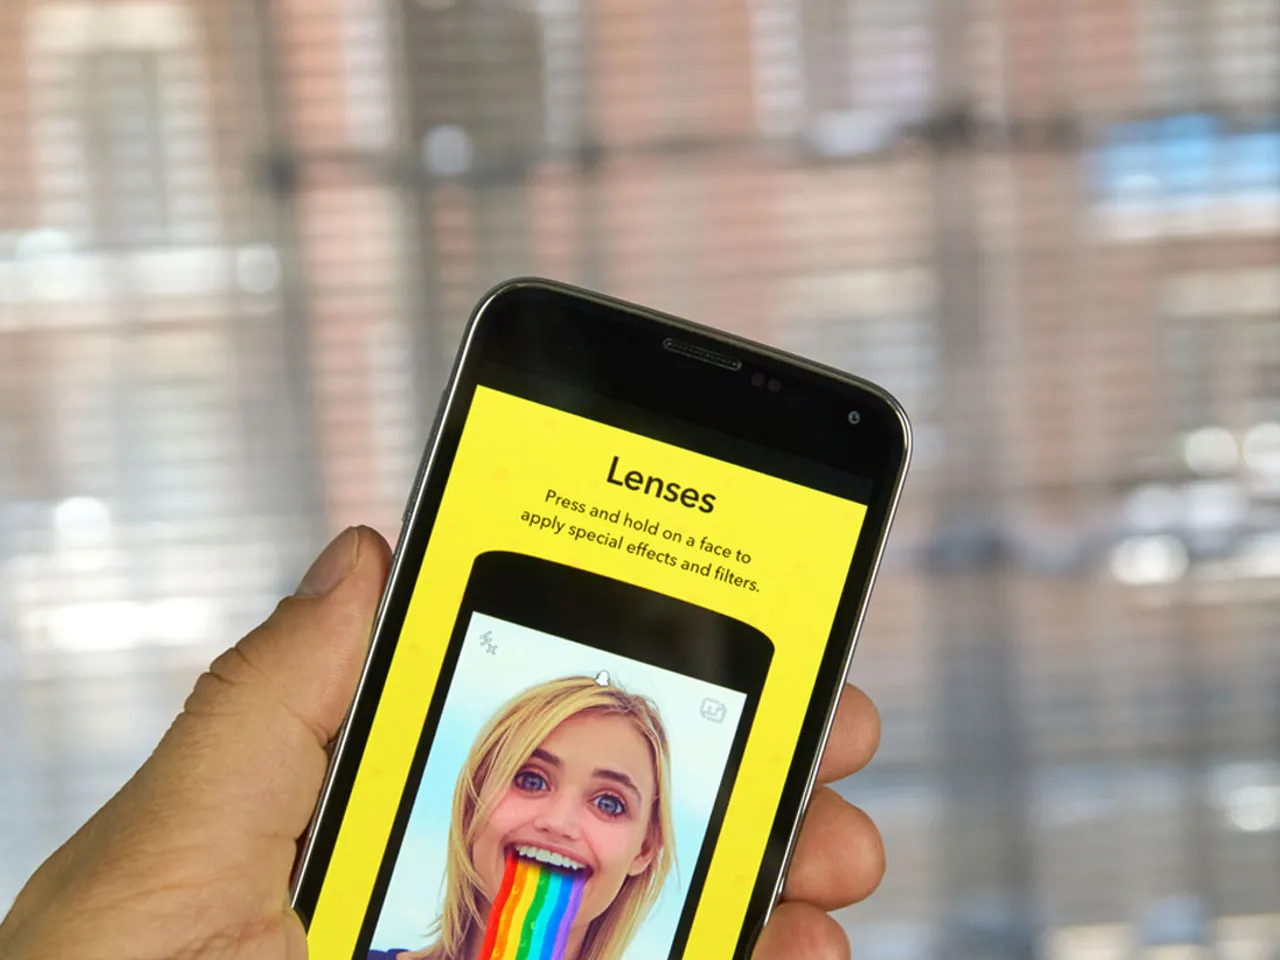 Brands that are Snapchat(ing) successfully